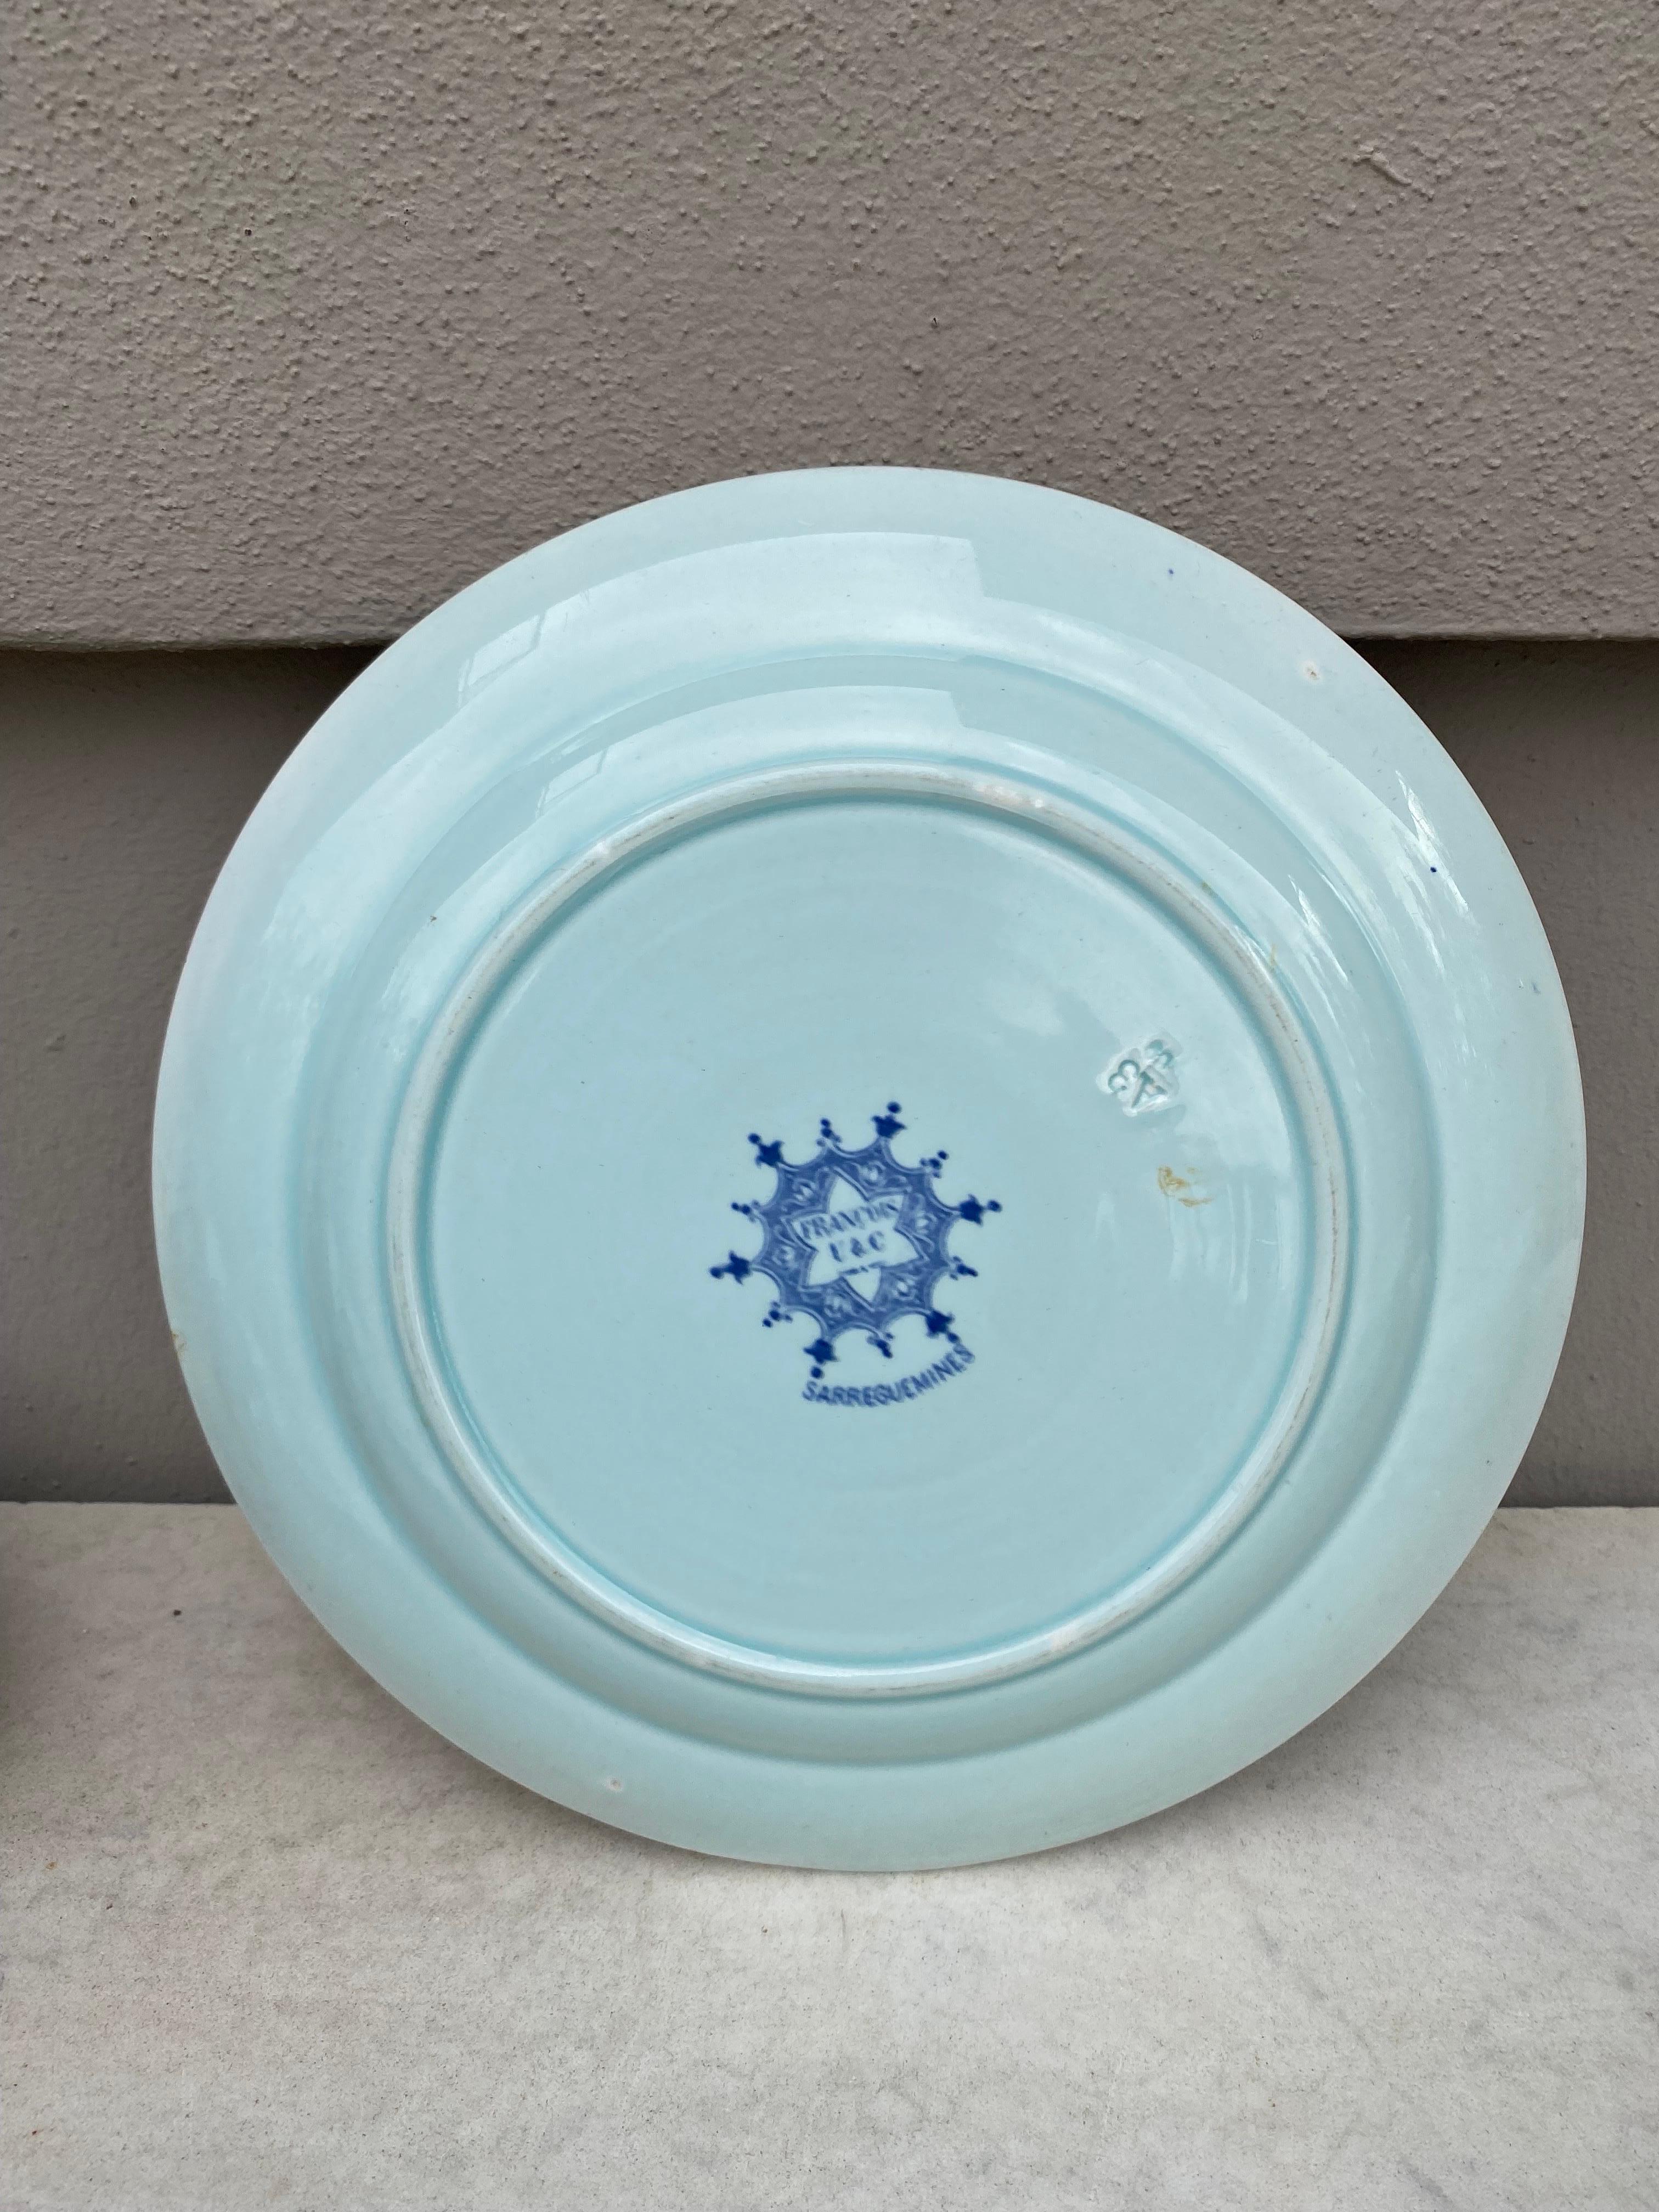 Late 19th Century 19th Century French Blue & White Faience Dinner Plate Sarreguemines